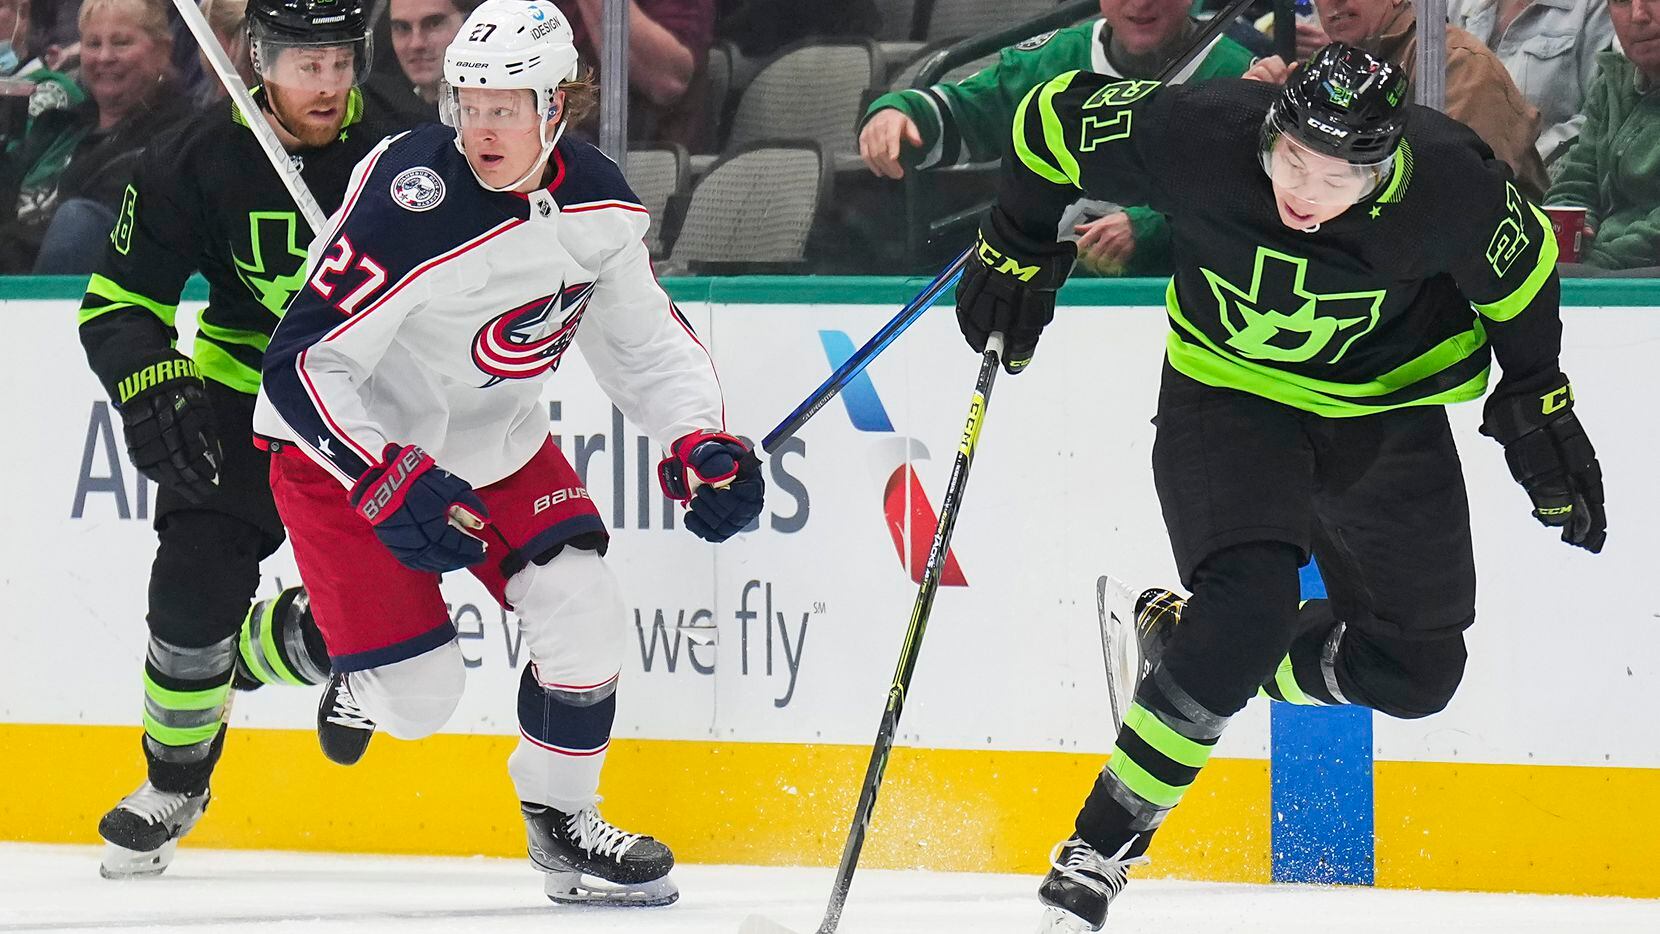 Dallas Stars left wing Jason Robertson (21) brings the puck up the ice past Columbus Blue Jackets defenseman Adam Boqvist (27) during the first period of an NHL hockey game at the American Airlines Center on Thursday, Dec. 2, 2021, in Dallas.